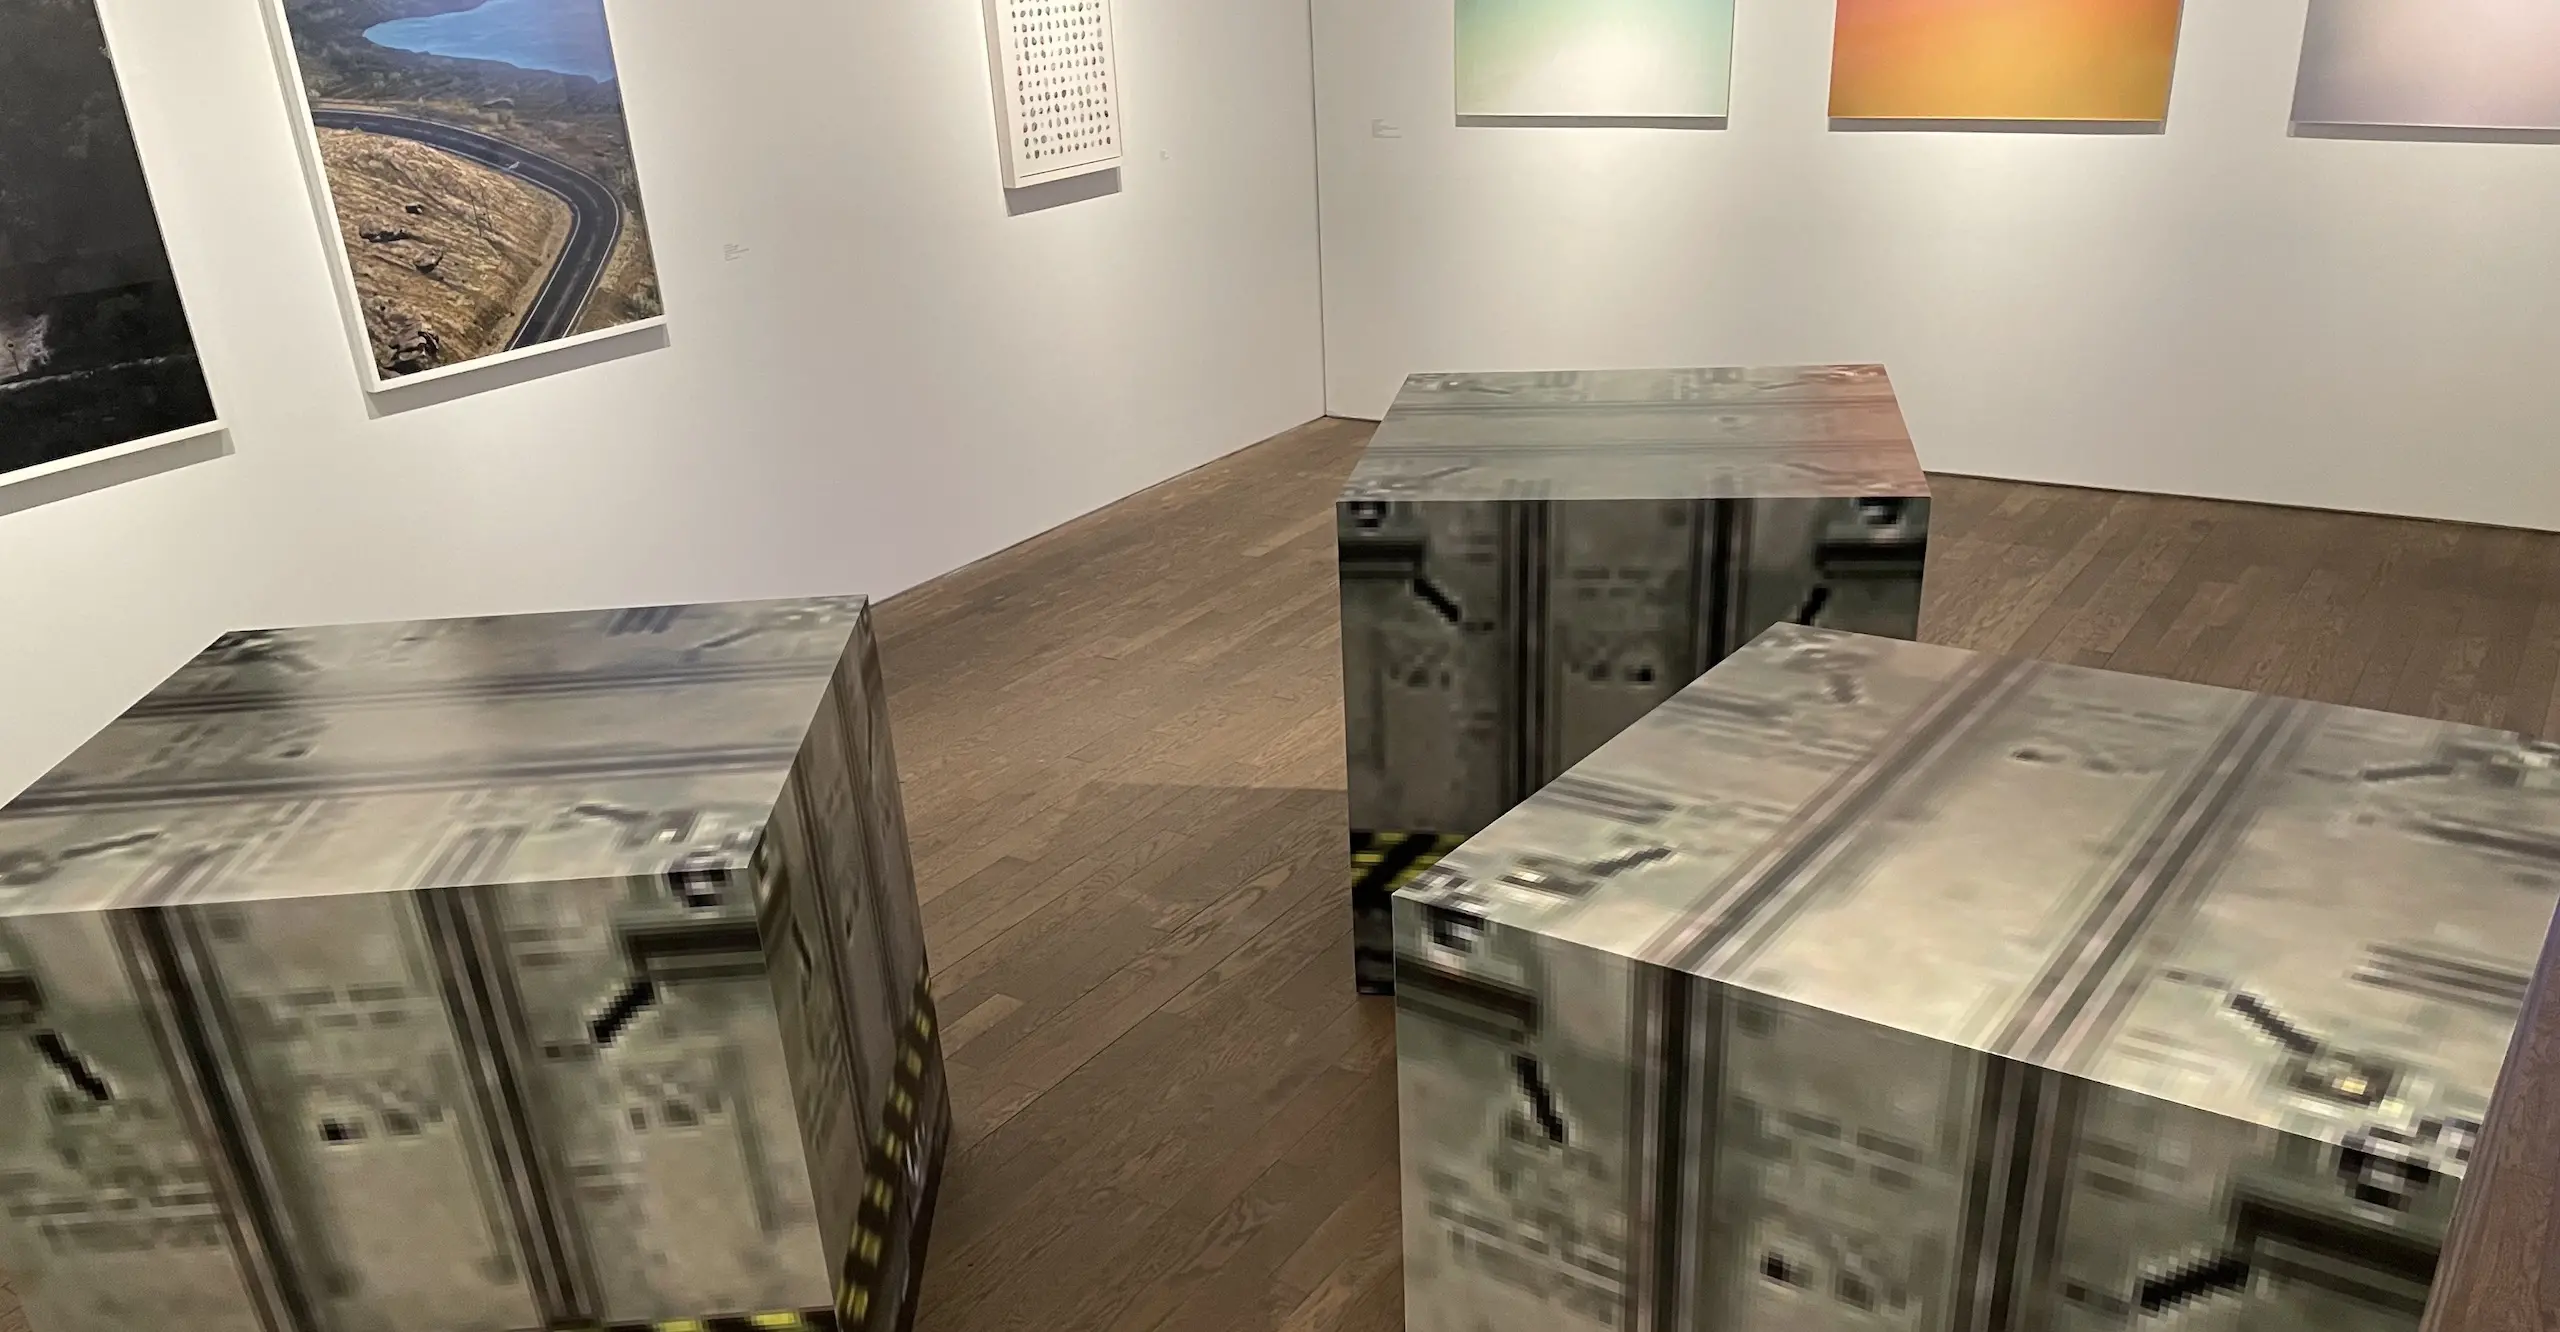 A gallery space with three sculptural cubes in the foreground that look like computer game blocks have landed into the 'real world'.